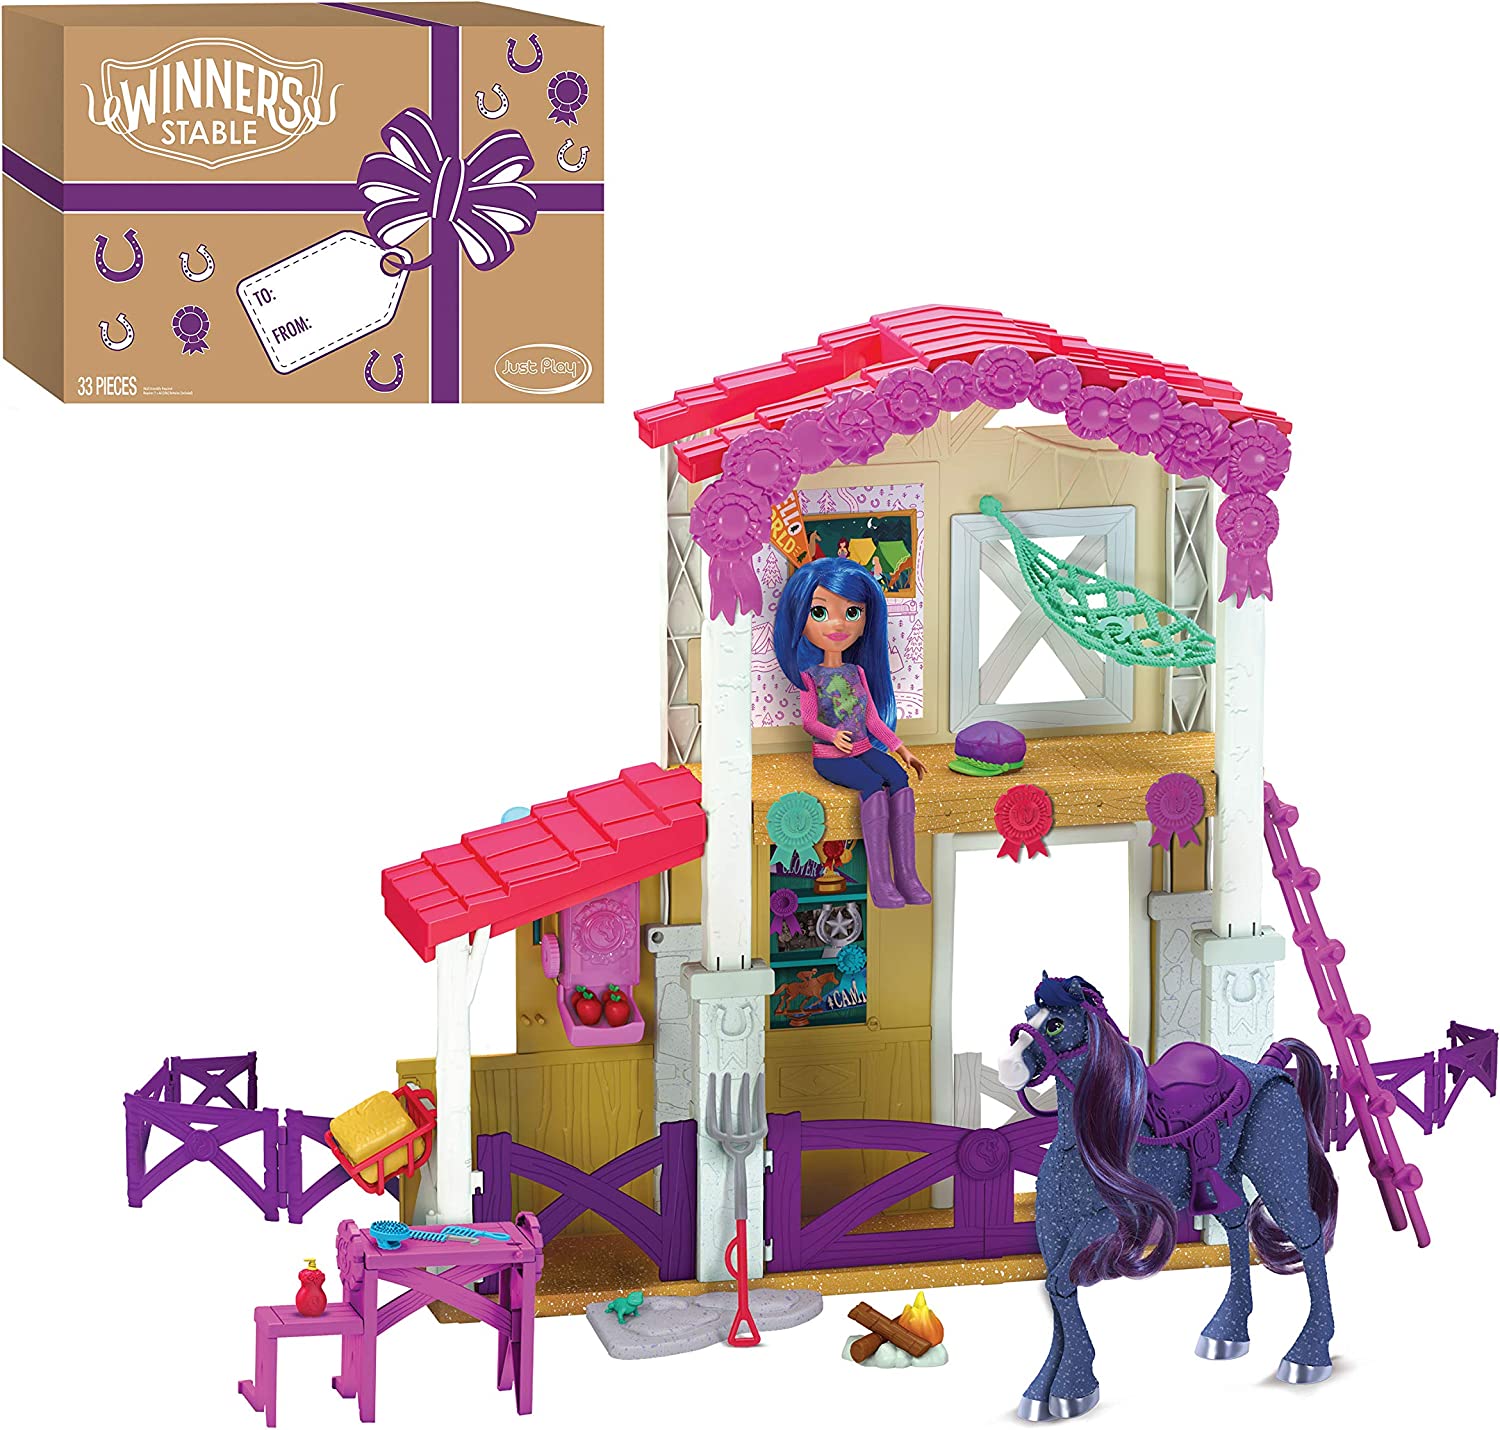 33-Piece Just Play Winner's Stable Camp Clover Barn Playset $8.40 + Free Shipping w/ Prime or on $25+